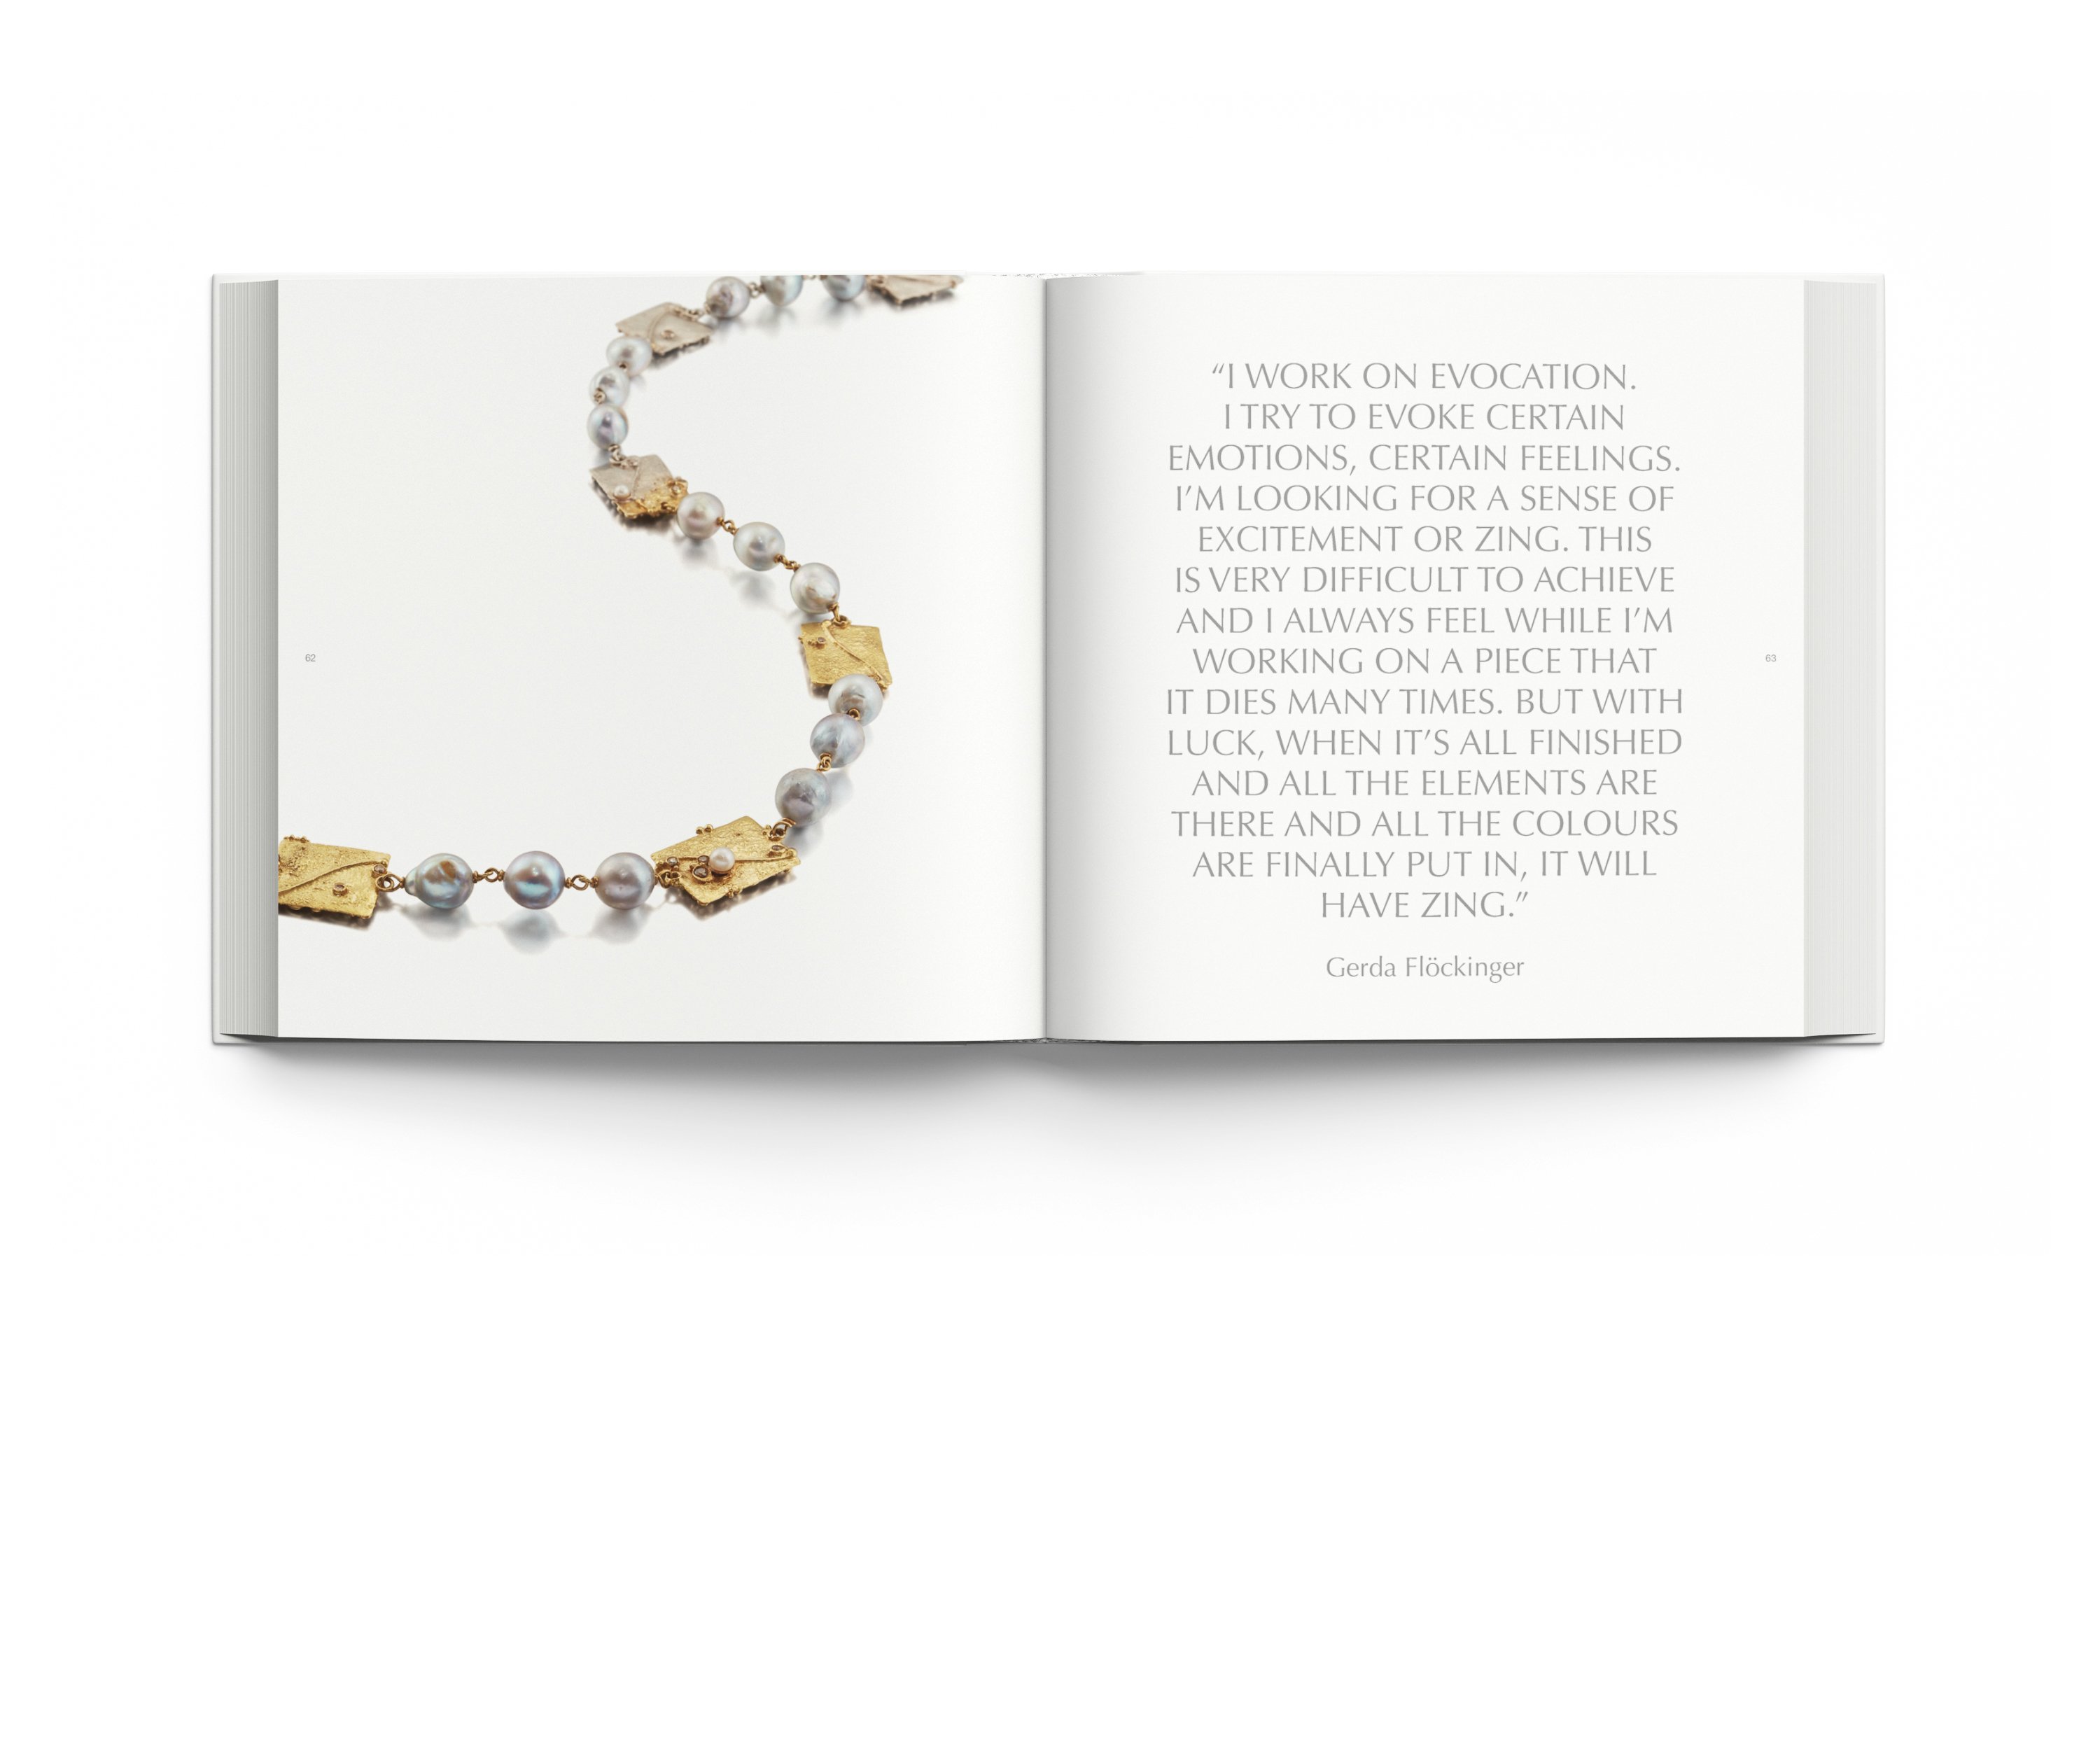 Gold necklace with diamond and amber jewels, on white cover, Modern British Jewellery Designers 1960-1980 in grey font above.